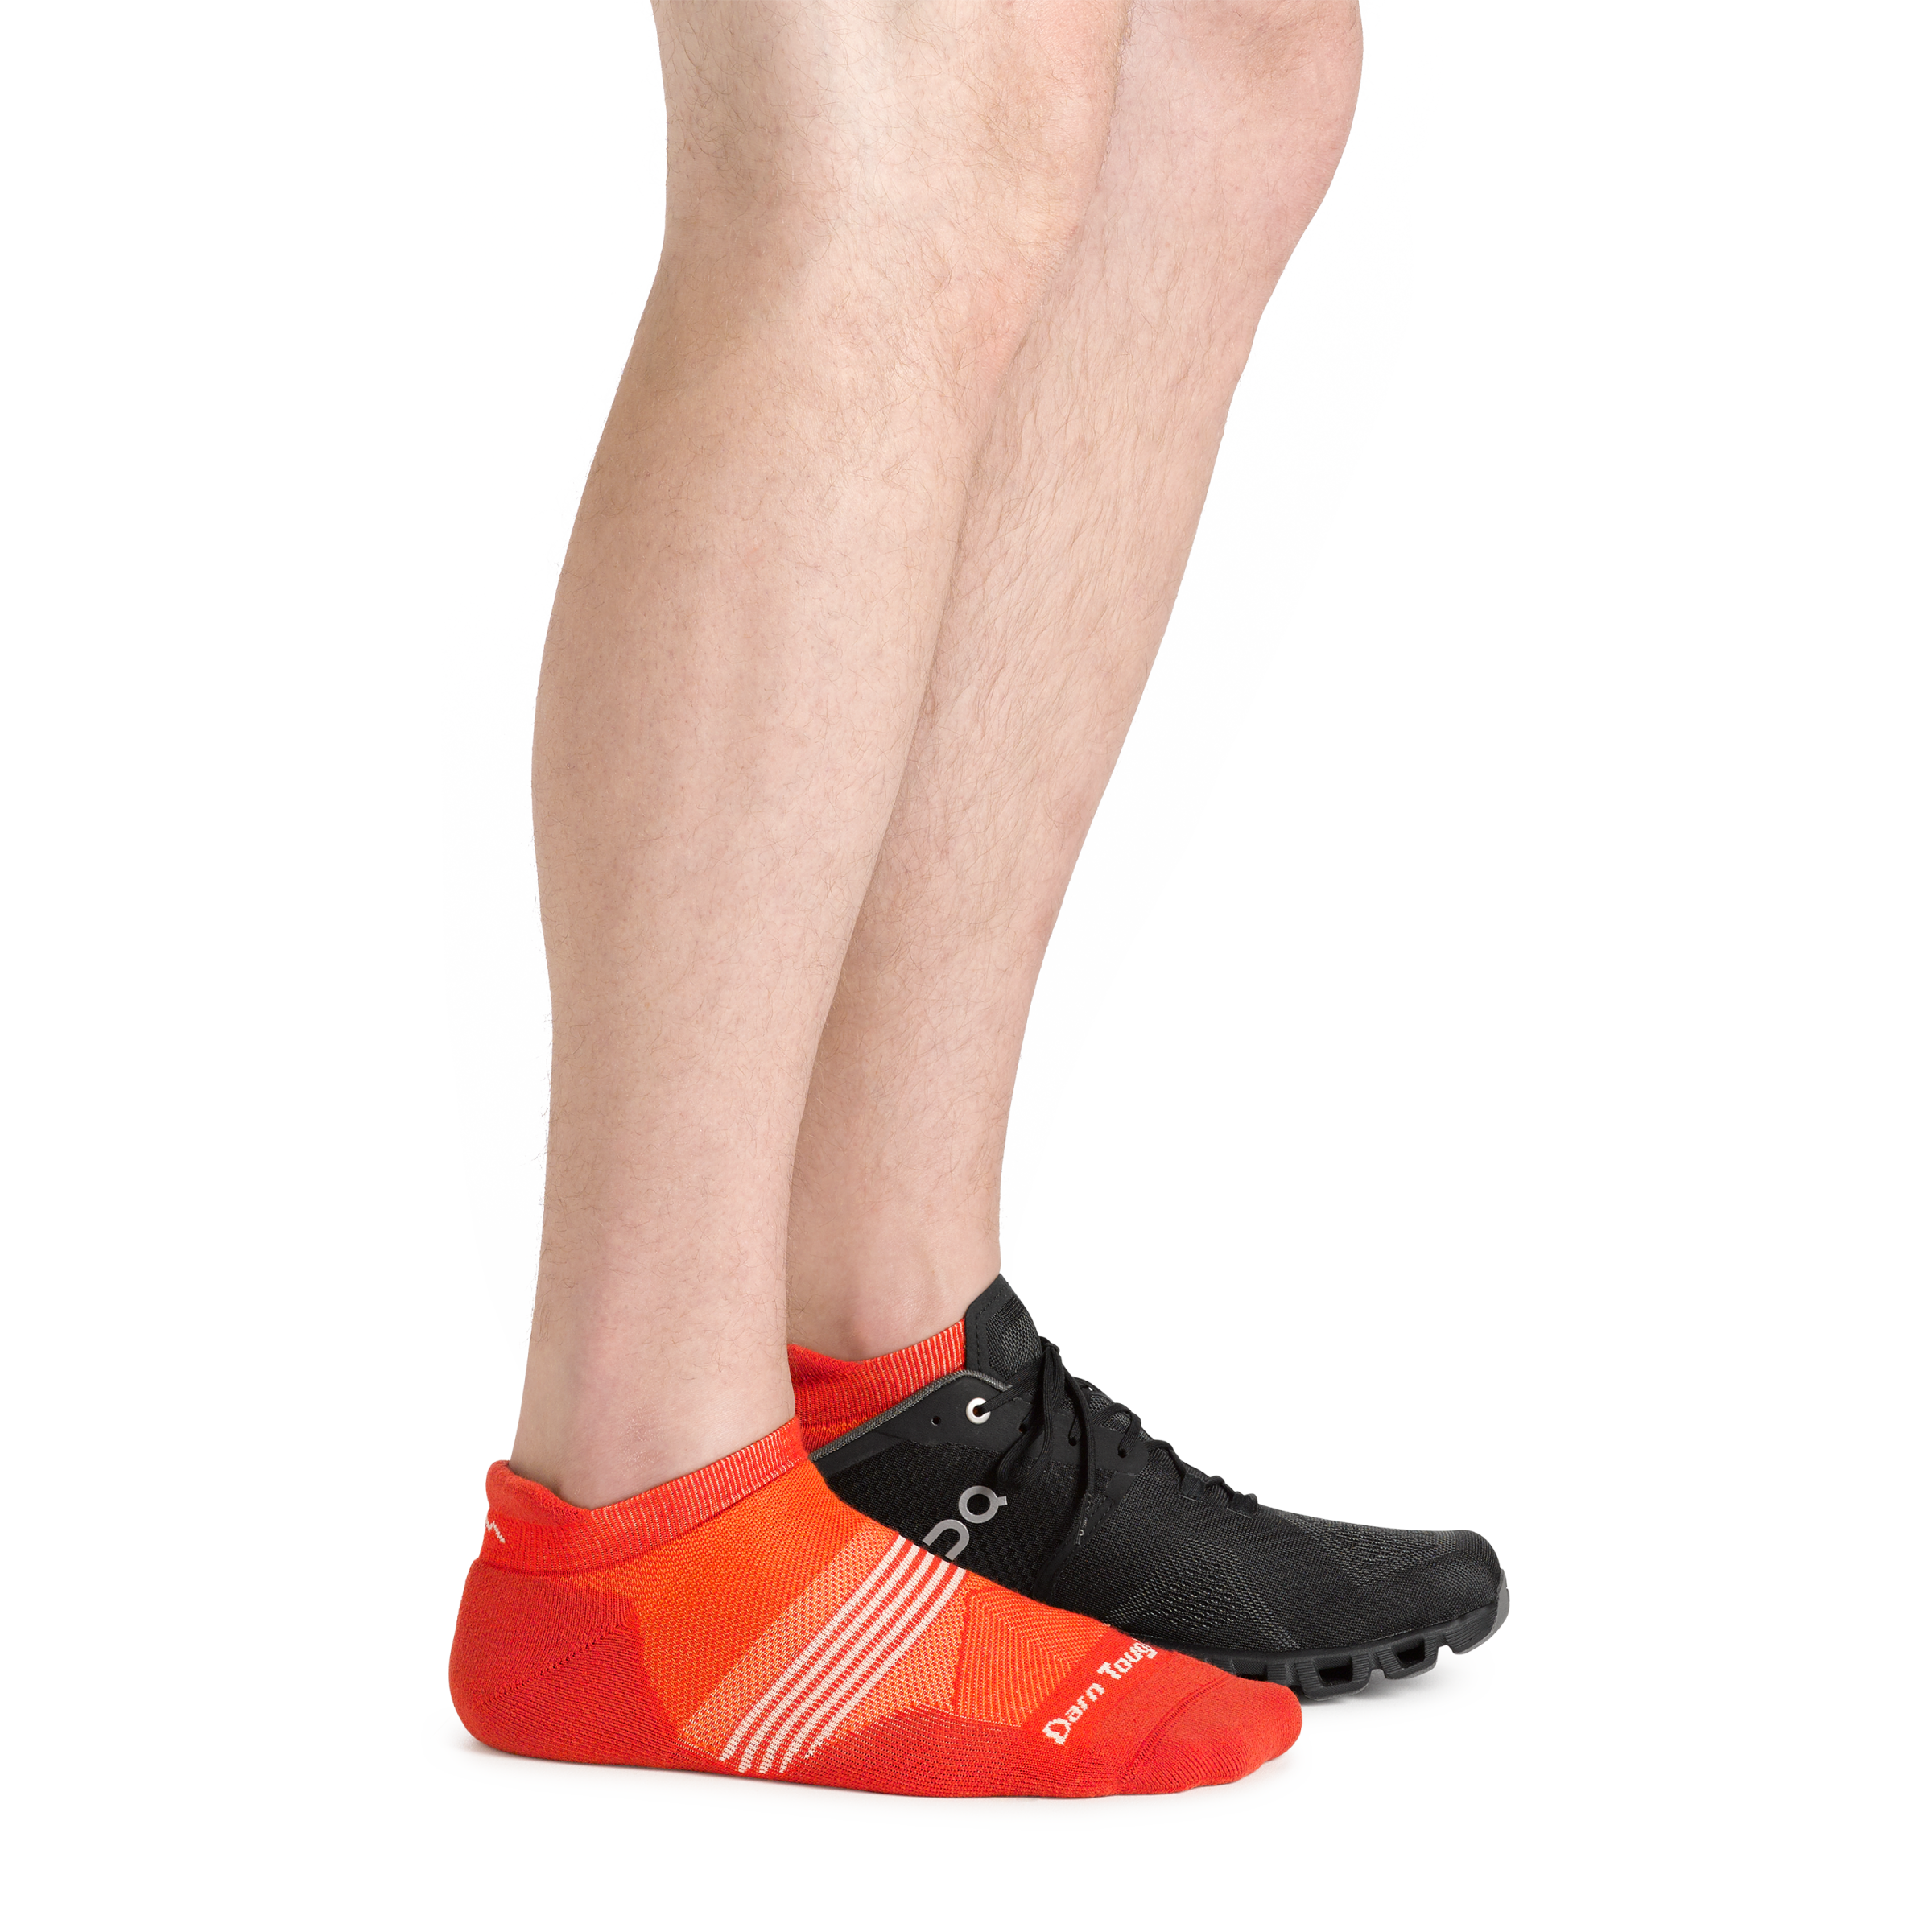 Side shot of model wearing the men's element no show tab running sock in tiger color with a black sneaker on his left foot